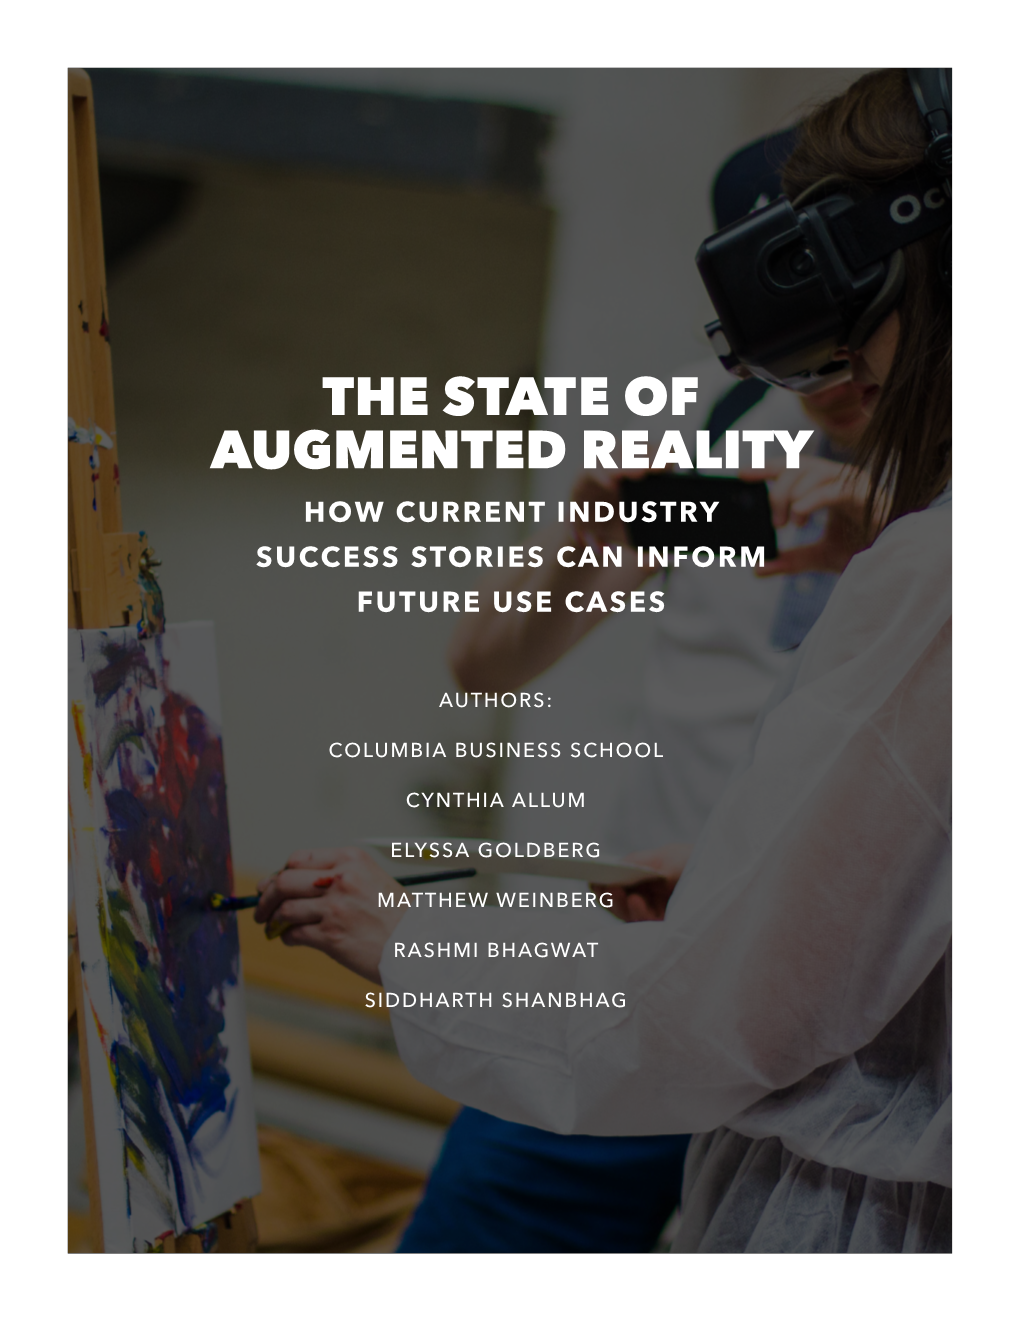 The State of Augmented Reality How Current Industry Success Stories Can Inform Future Use Cases